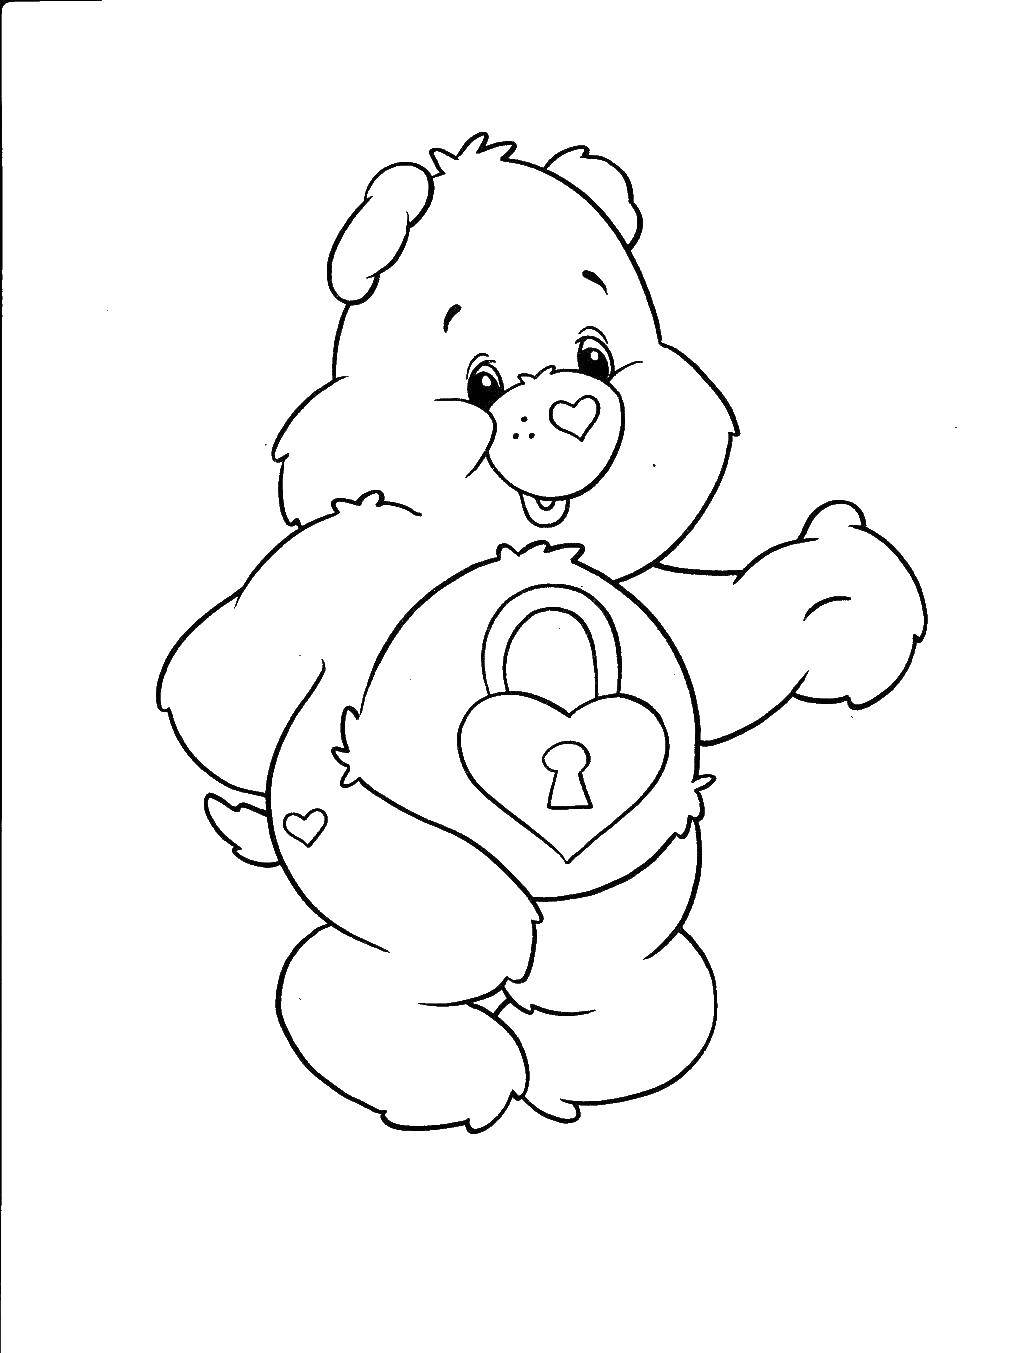 Coloring Bear from the movie rainbow bears. Category bright bears. Tags:  rainbow bears, bears.